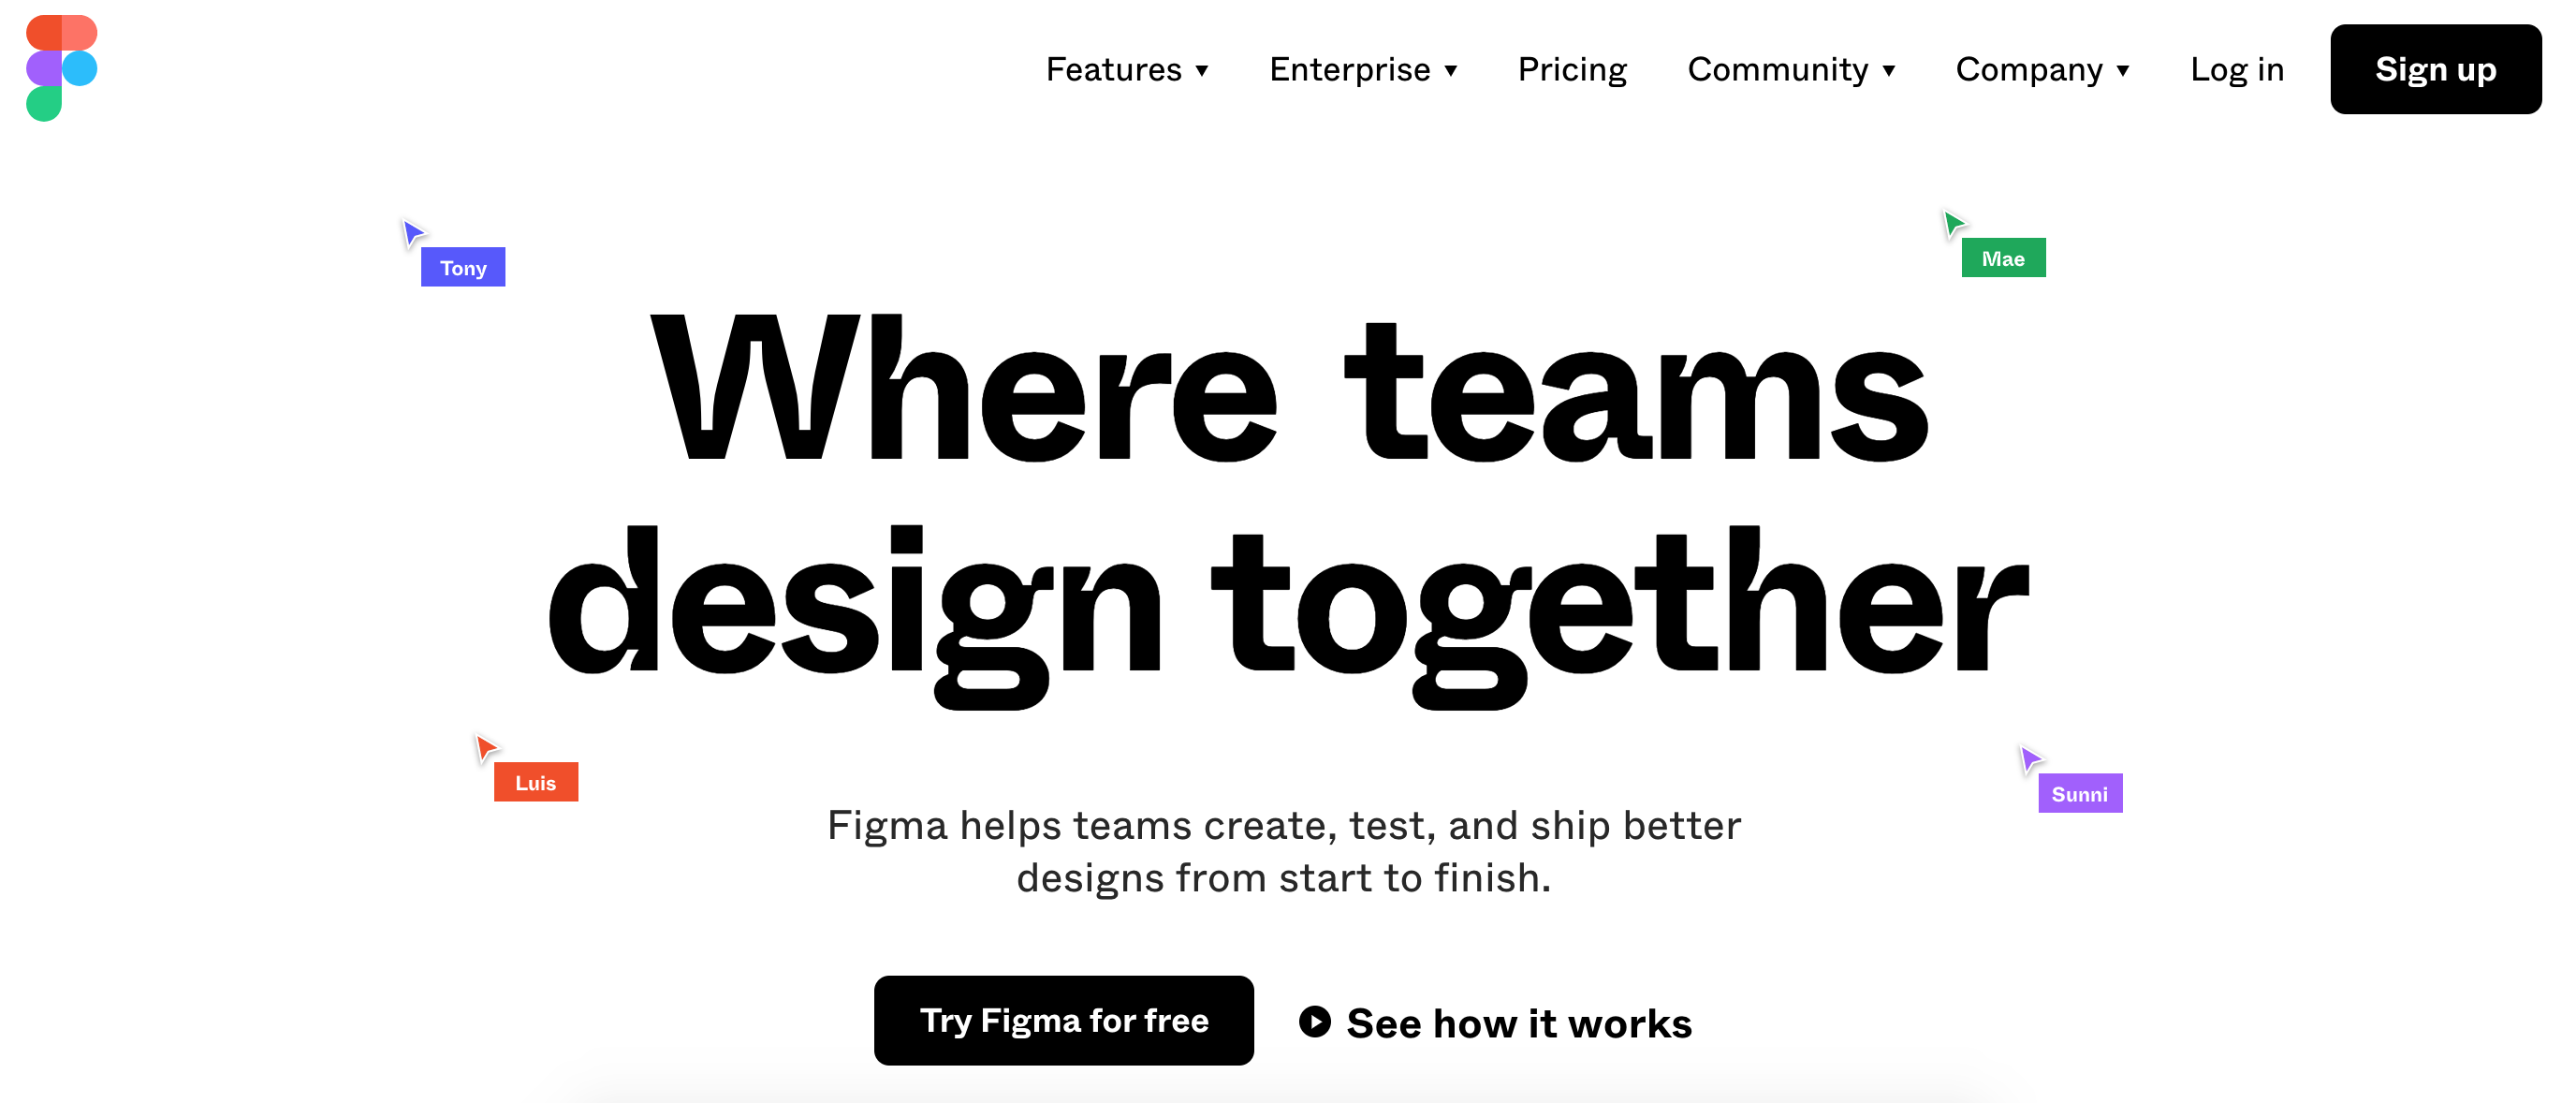 Figma is a design tool to help clarify the design process for marketing and design automation